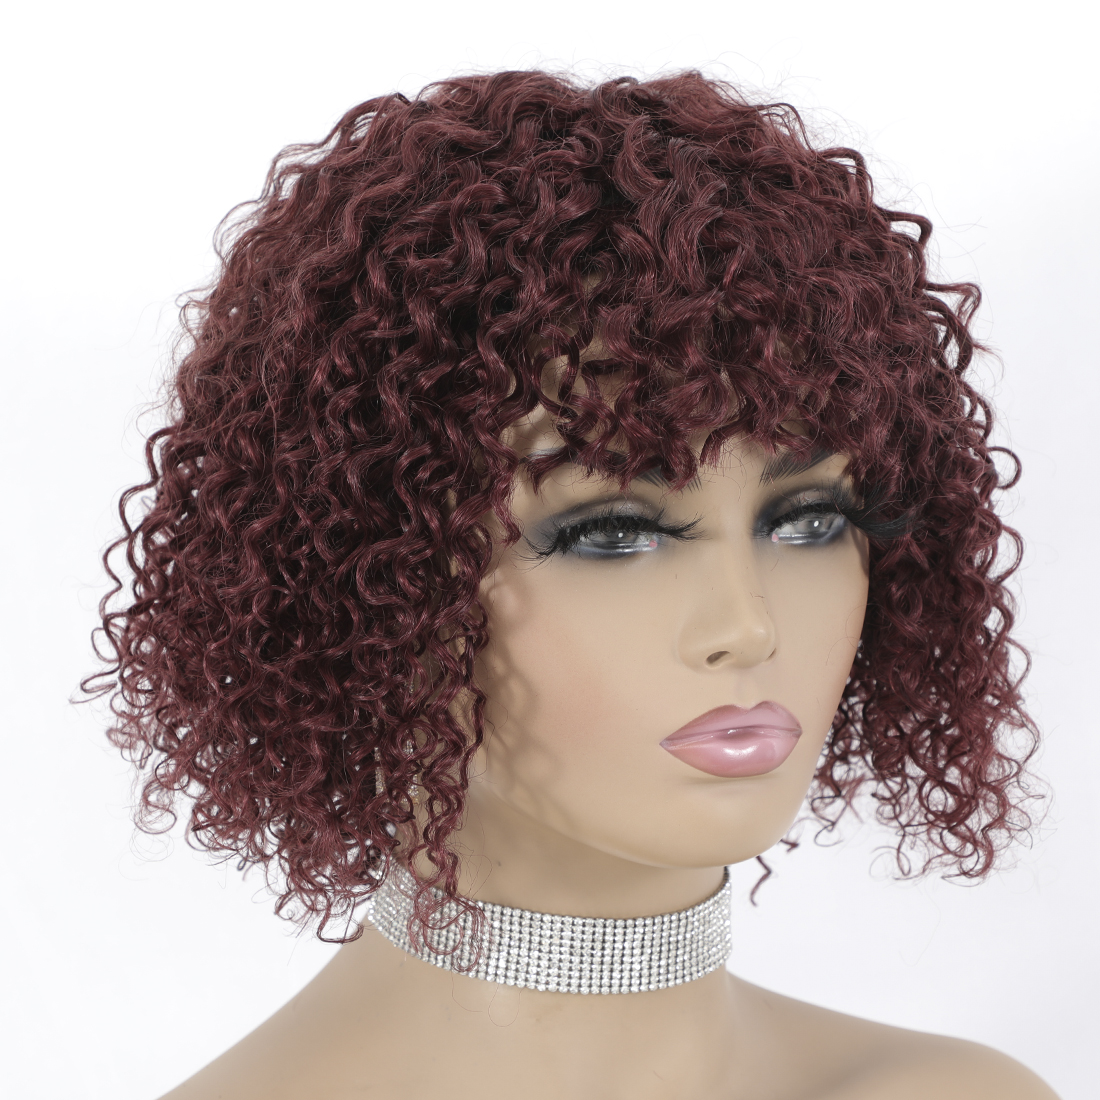 Non Lace Short Pixie Curly  Brazilian Human Hair Wig With Fringe Bangs 100% Human Hair Jerry Curl Wigs For Black Women